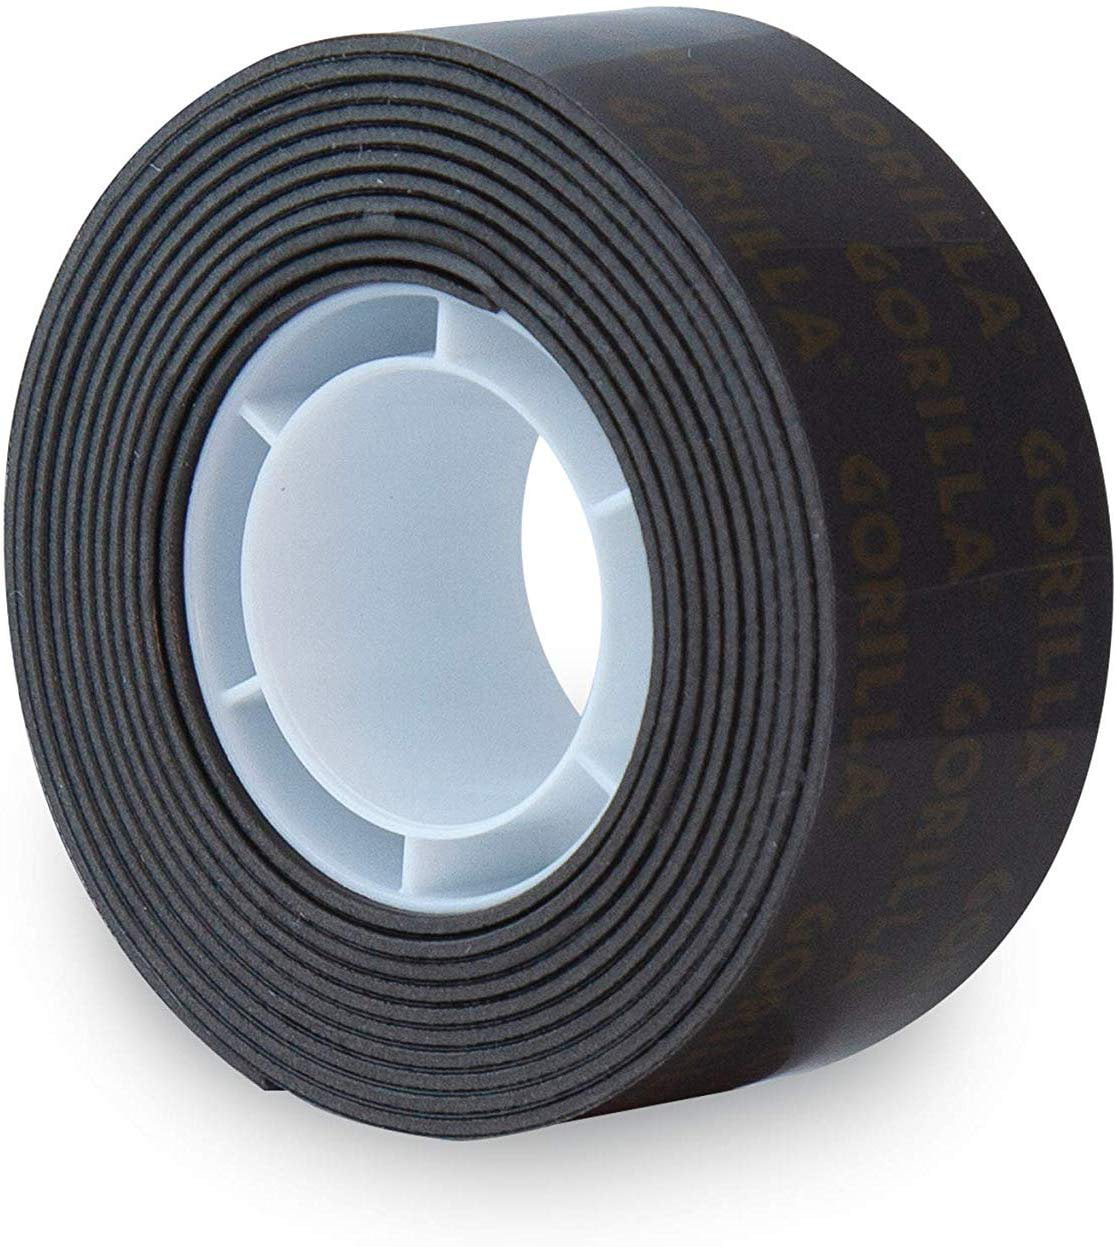 Gorilla 1.41 in. x 8 yd. Double Sided Tape (6-pack) 100925